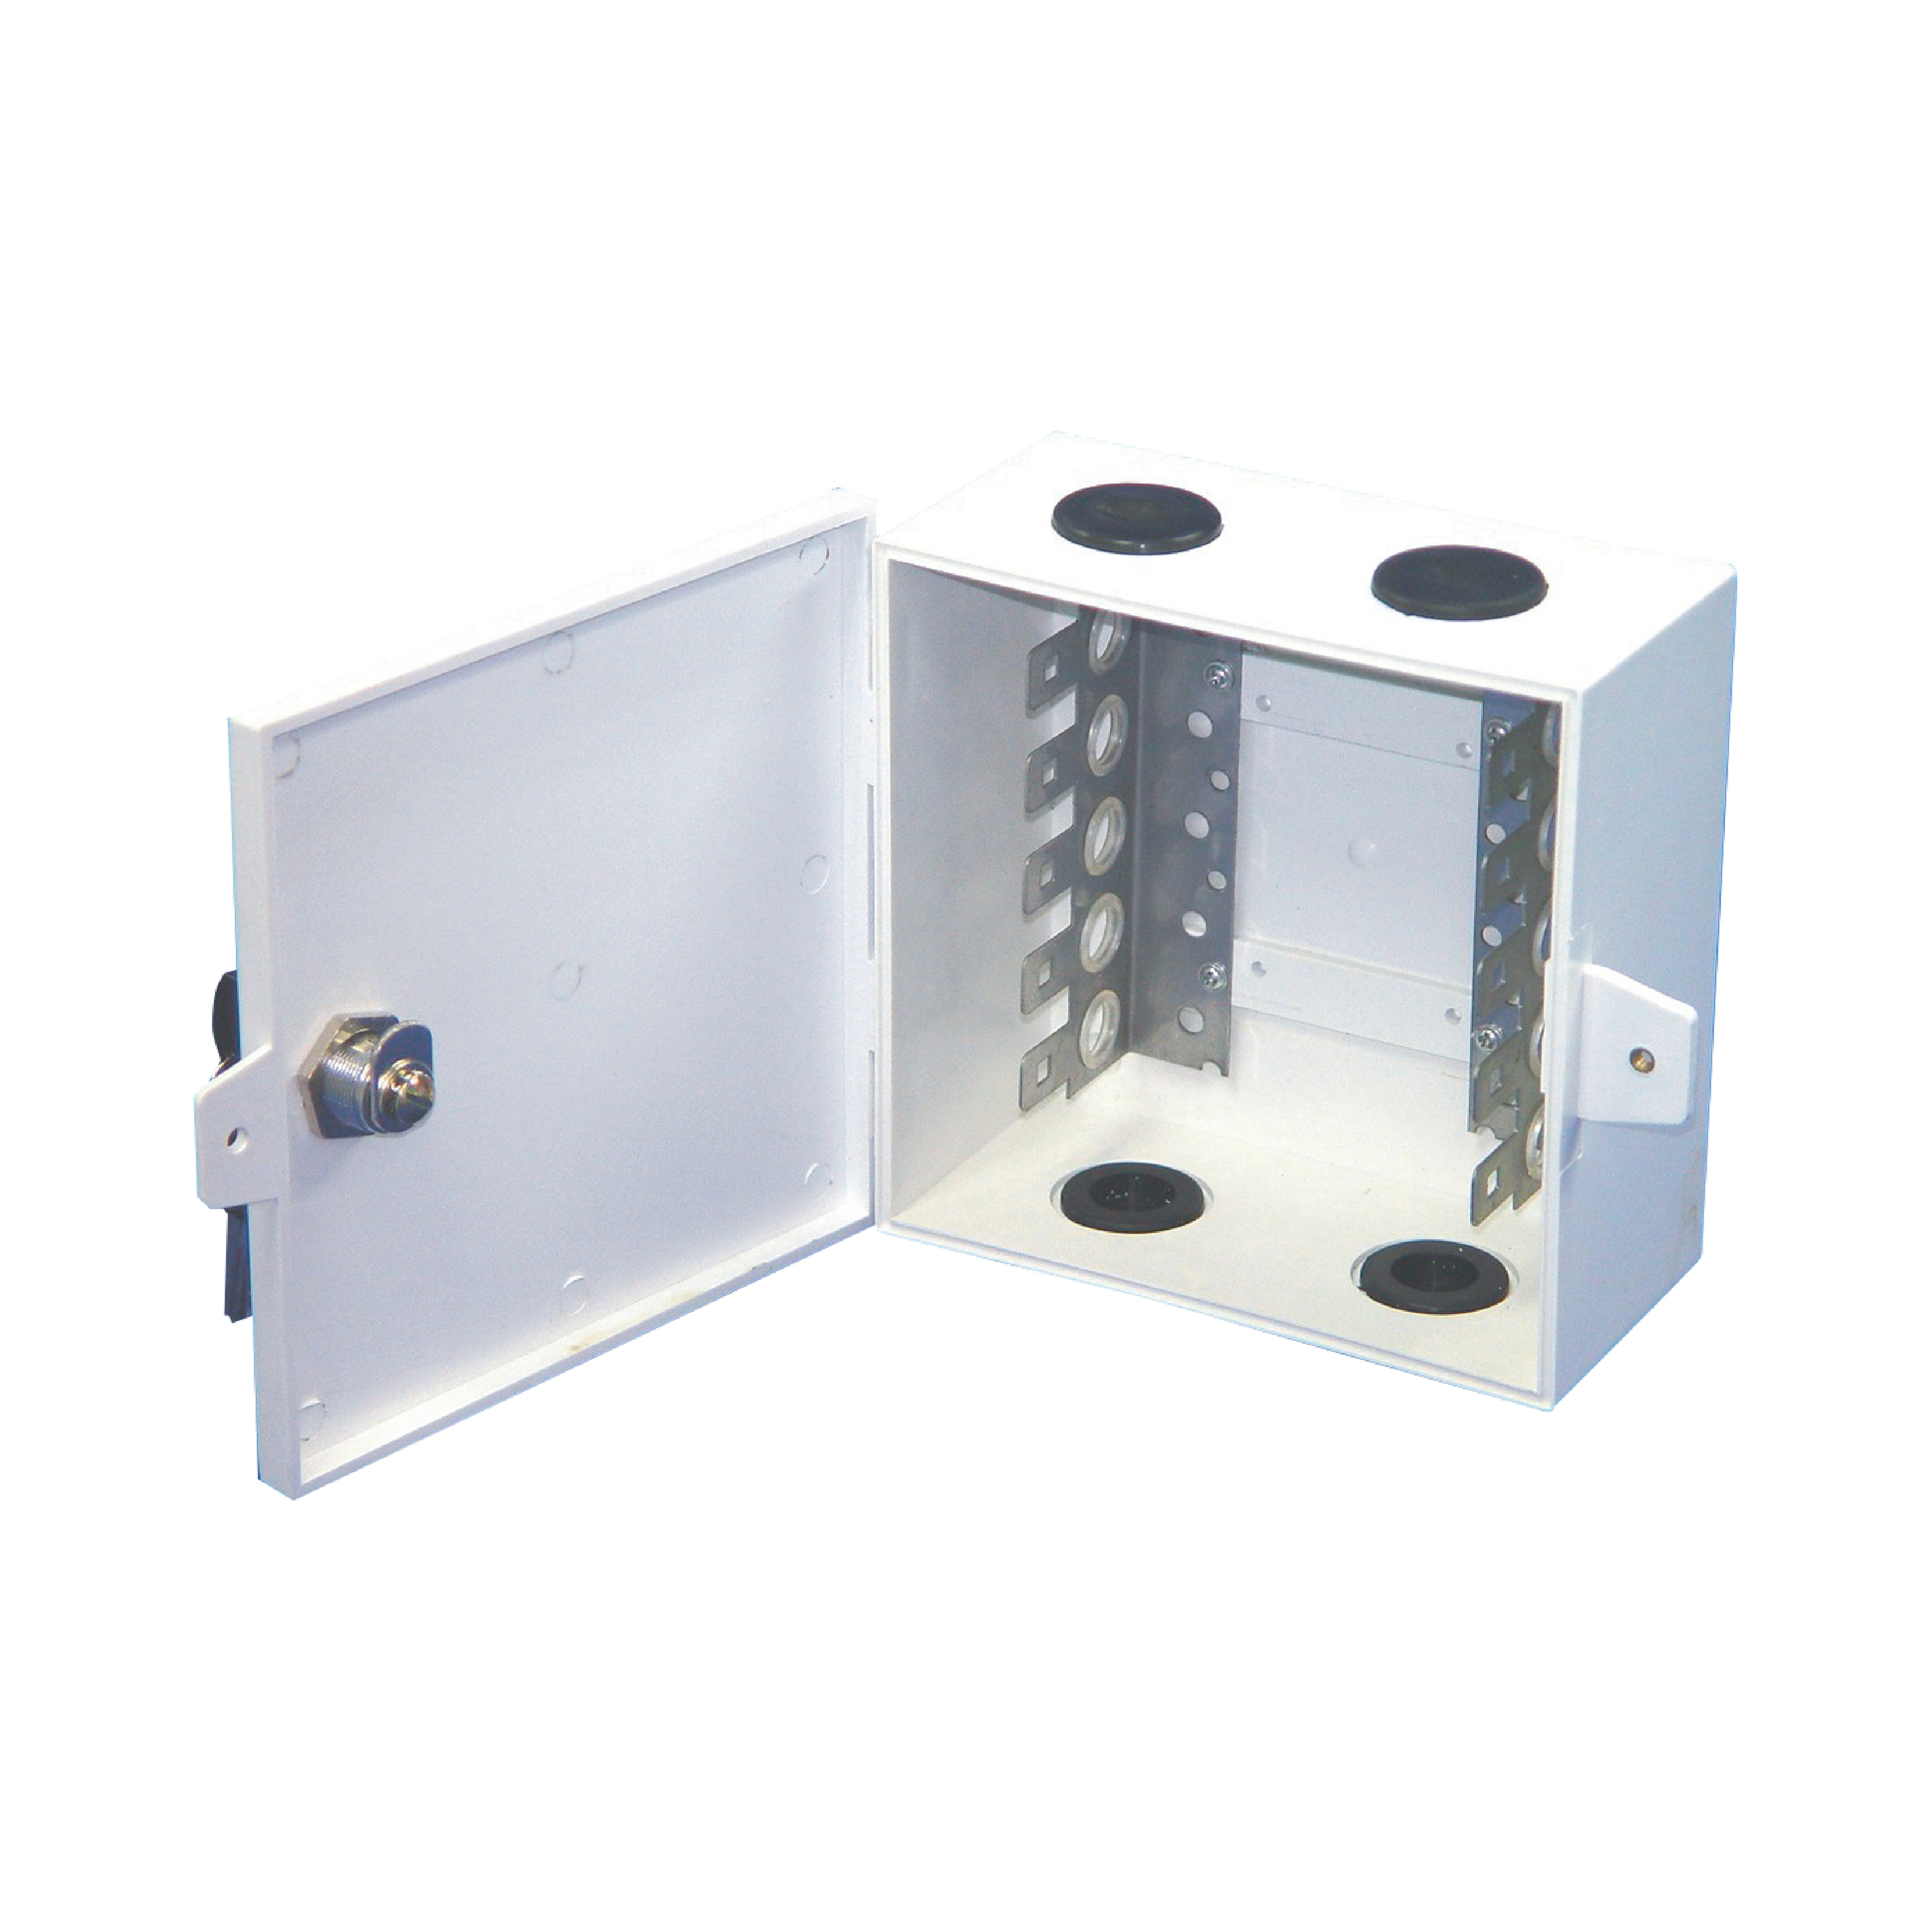 Voice & Data_Modular Connecting System_Wall Mount DP_50 Pairs (Plastic).jpg